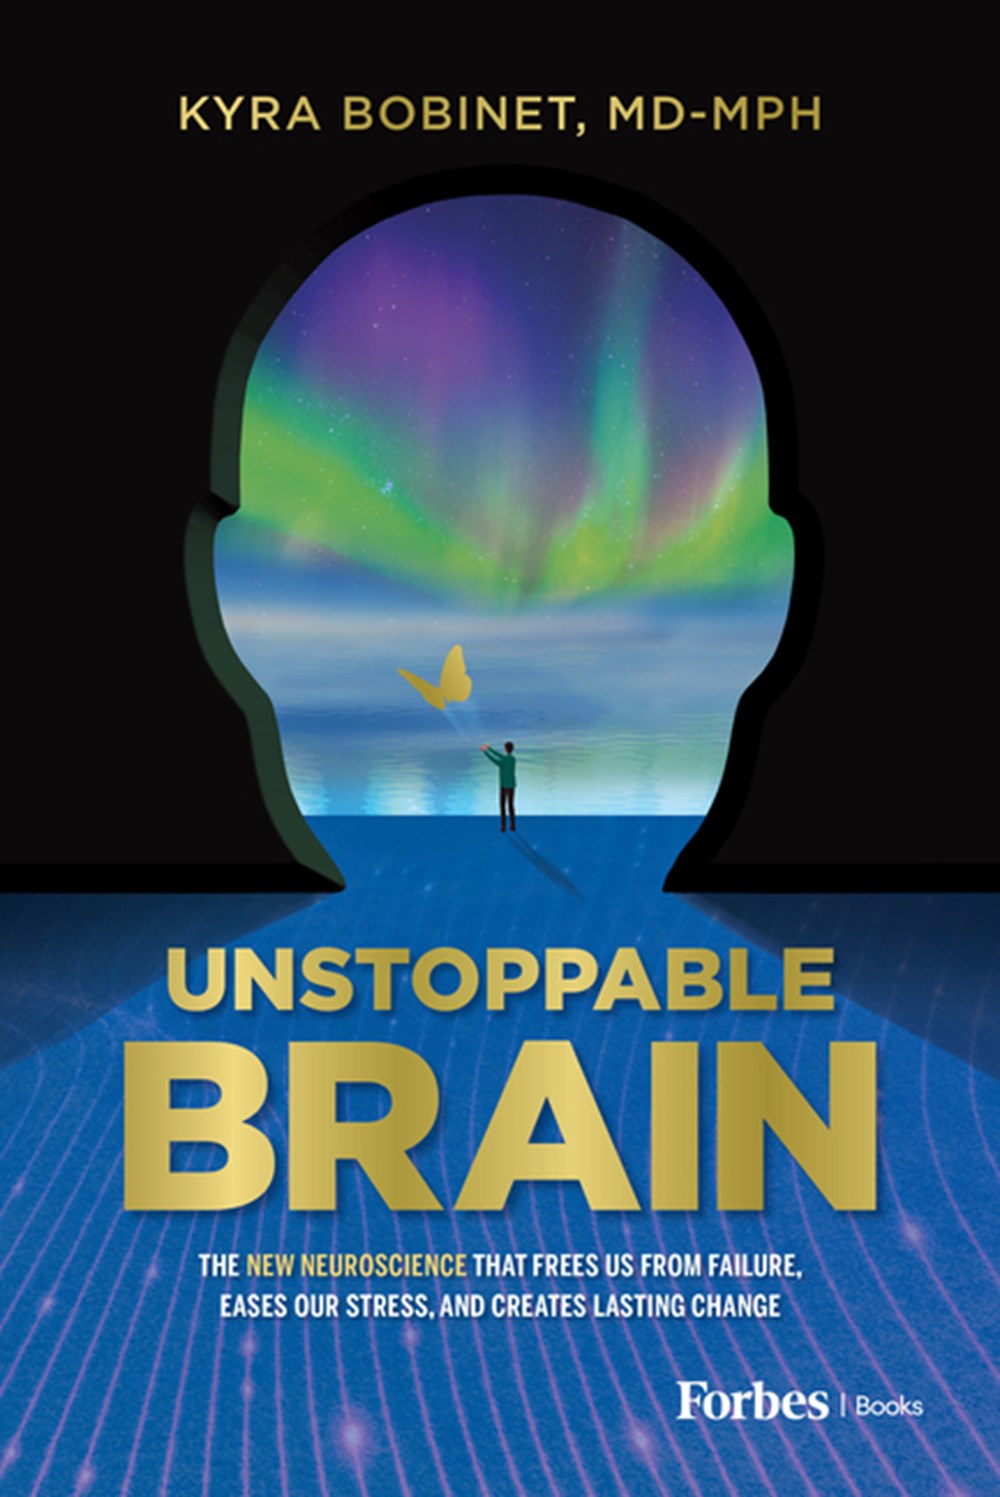 Unstoppable Brain: The New Neuroscience That Frees Us from Failure, Eases Our Stress, and Creates La